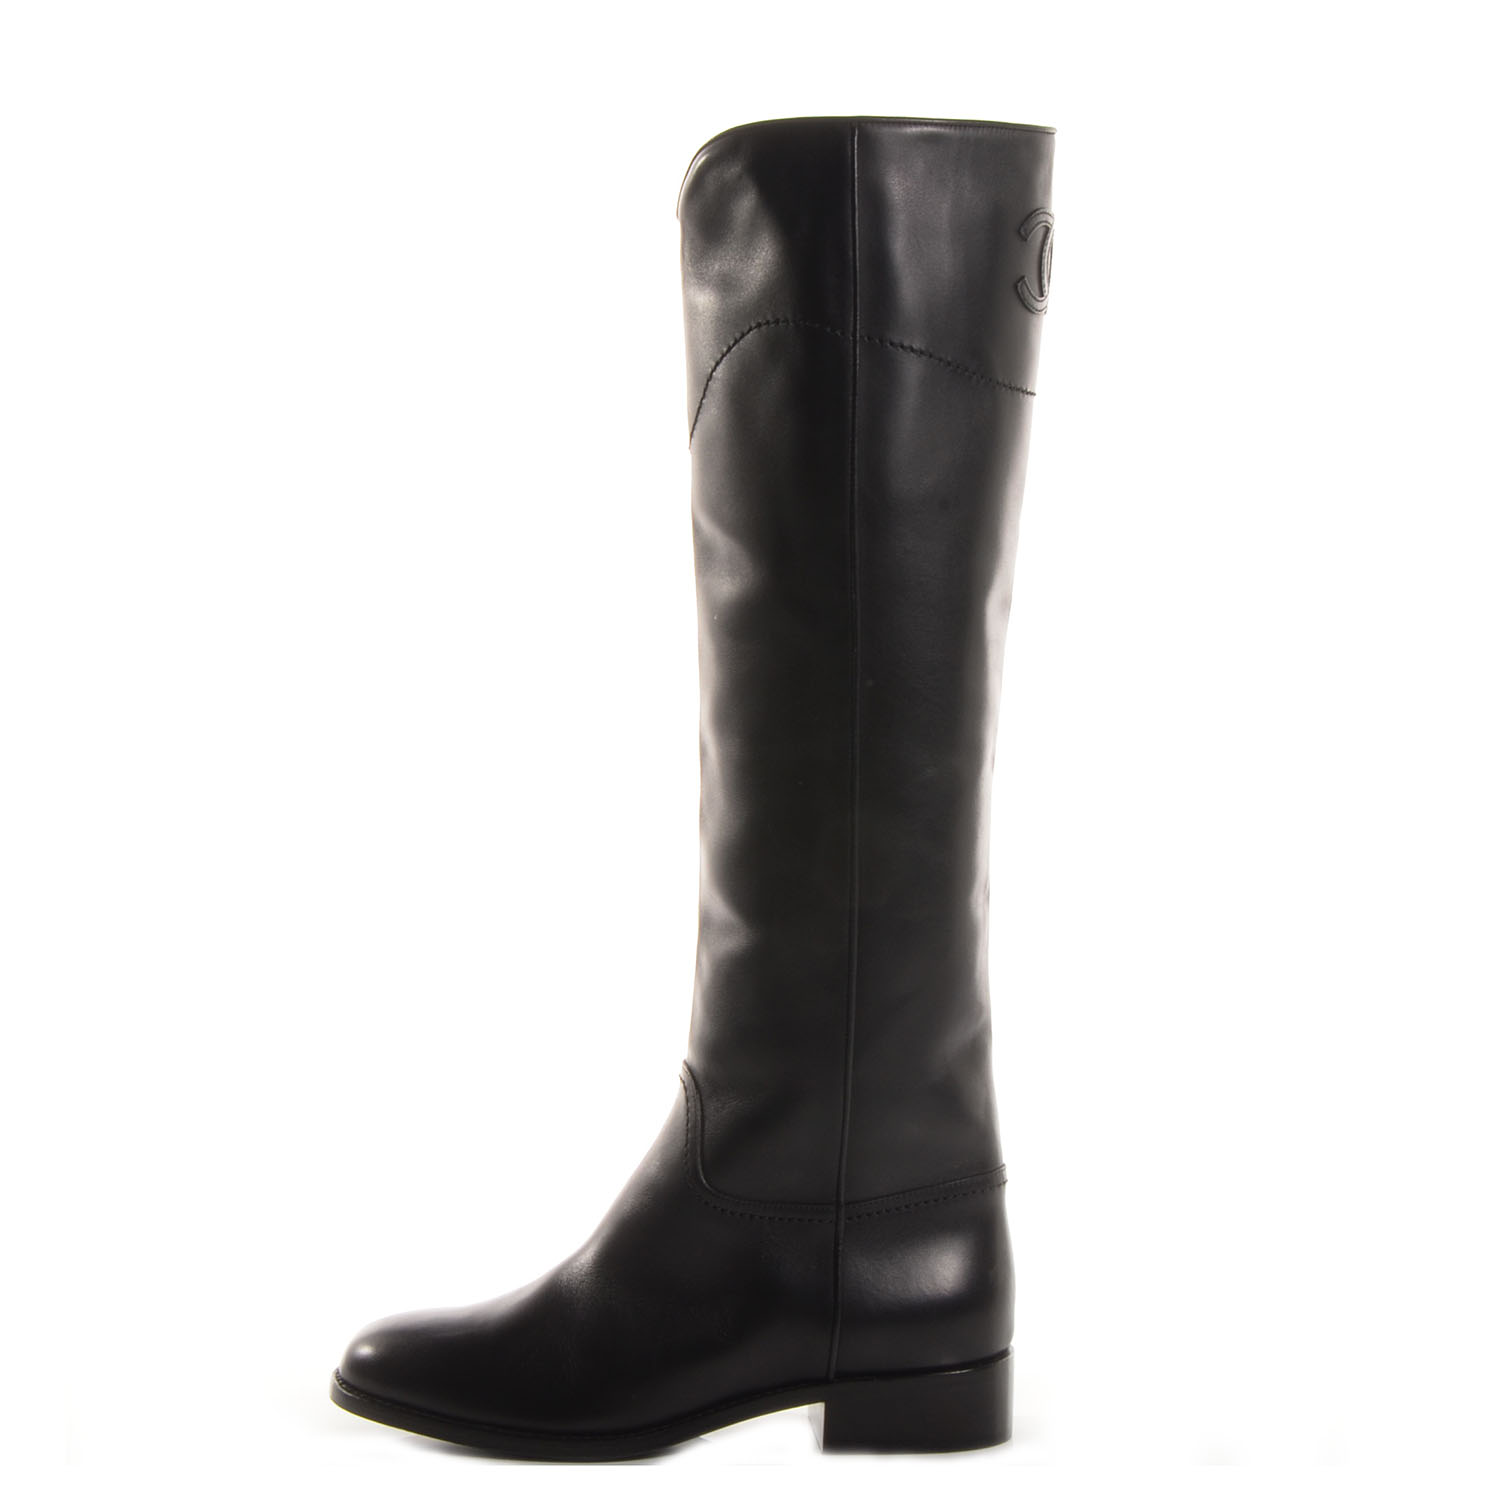 CHANEL Leather Ascot Riding Boots Black 